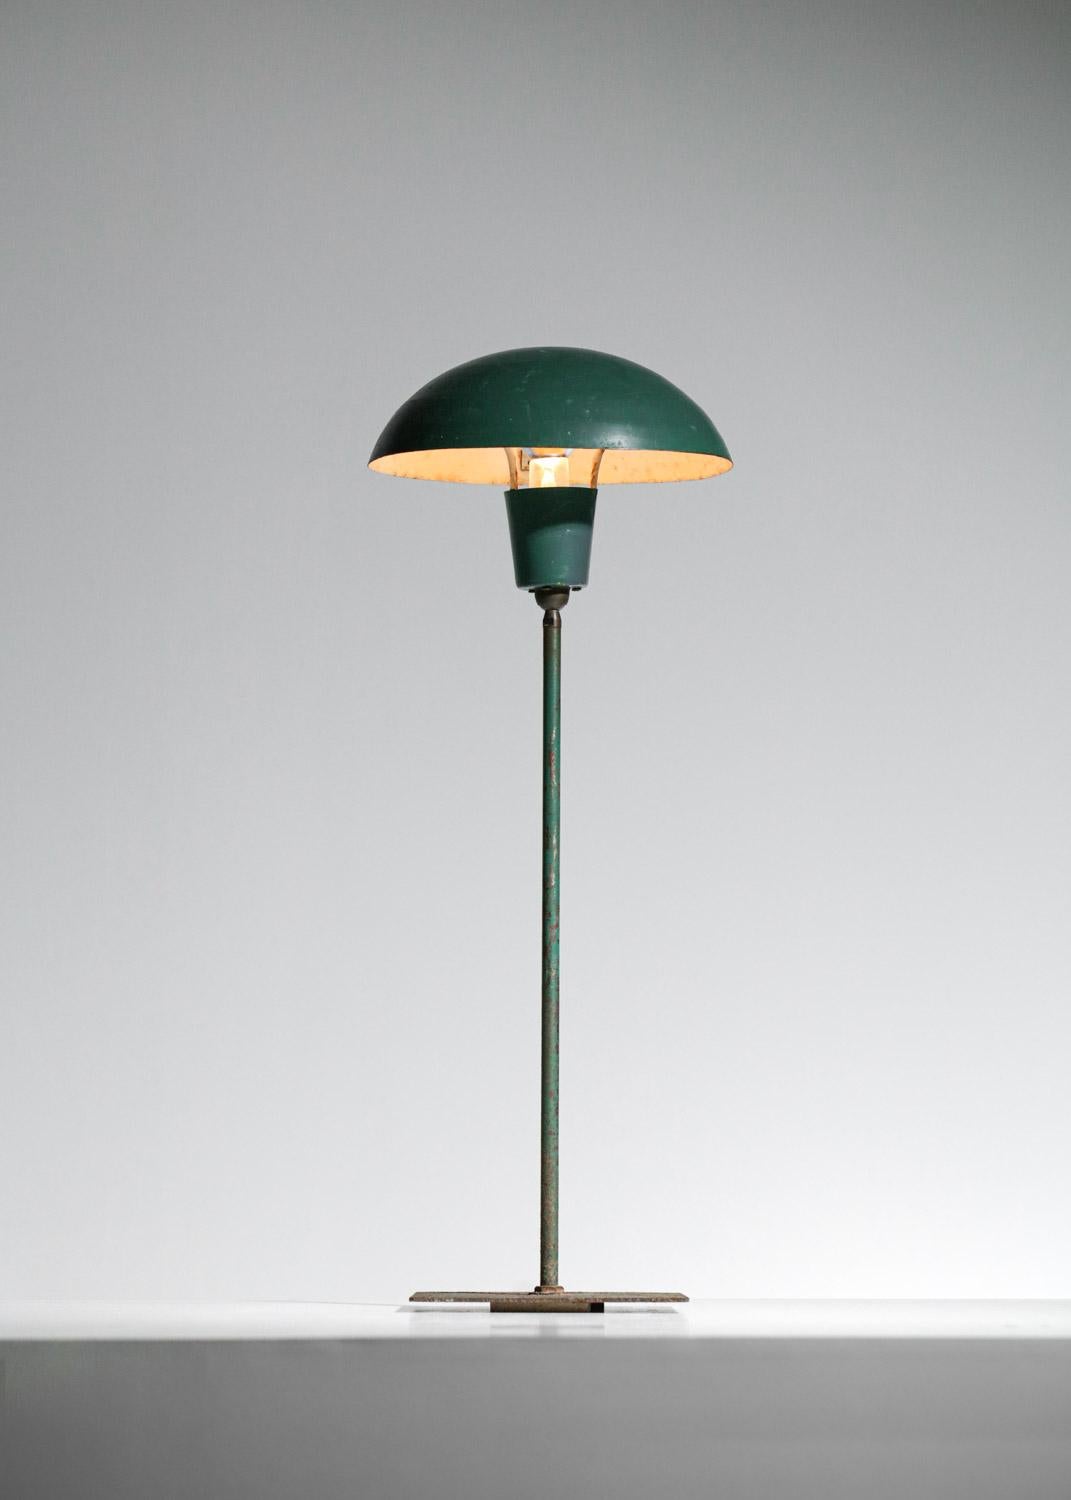 Scandinavian Industrial style outdoor table or small floor lamp in the style of Poul Hennigsen's work dating from the 1950s. Structure of the base and the shade in dark green lacquered metal (original paint). A ball joint allows the shade to be